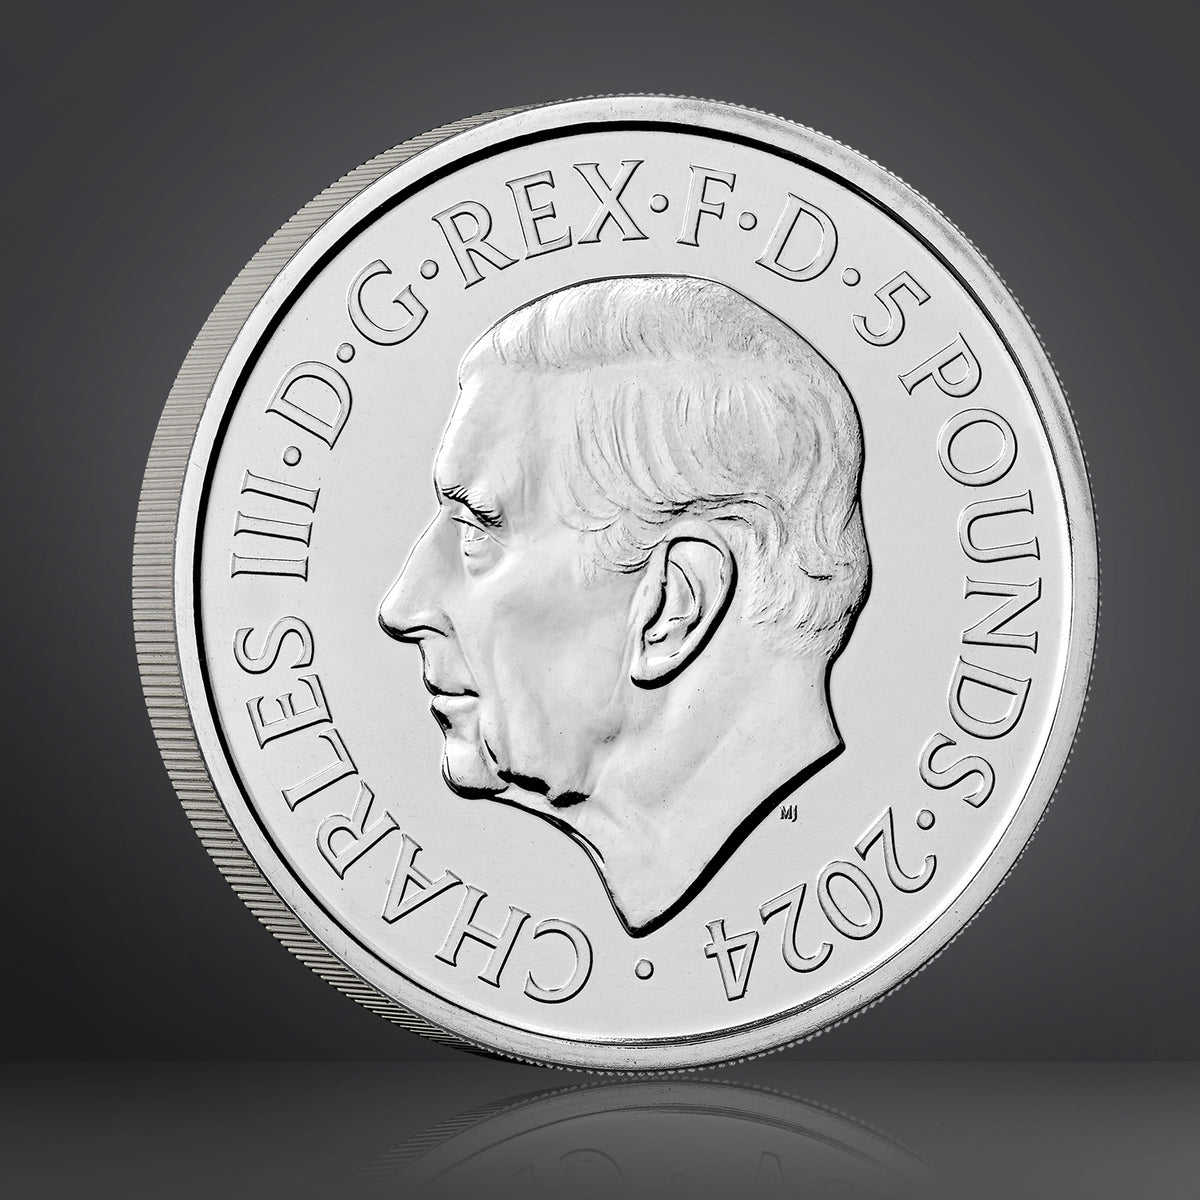 James Bond £5 Crown Brilliant Uncirculated Coin - 2000s Edition - By The Royal Mint (Copy) 007Store